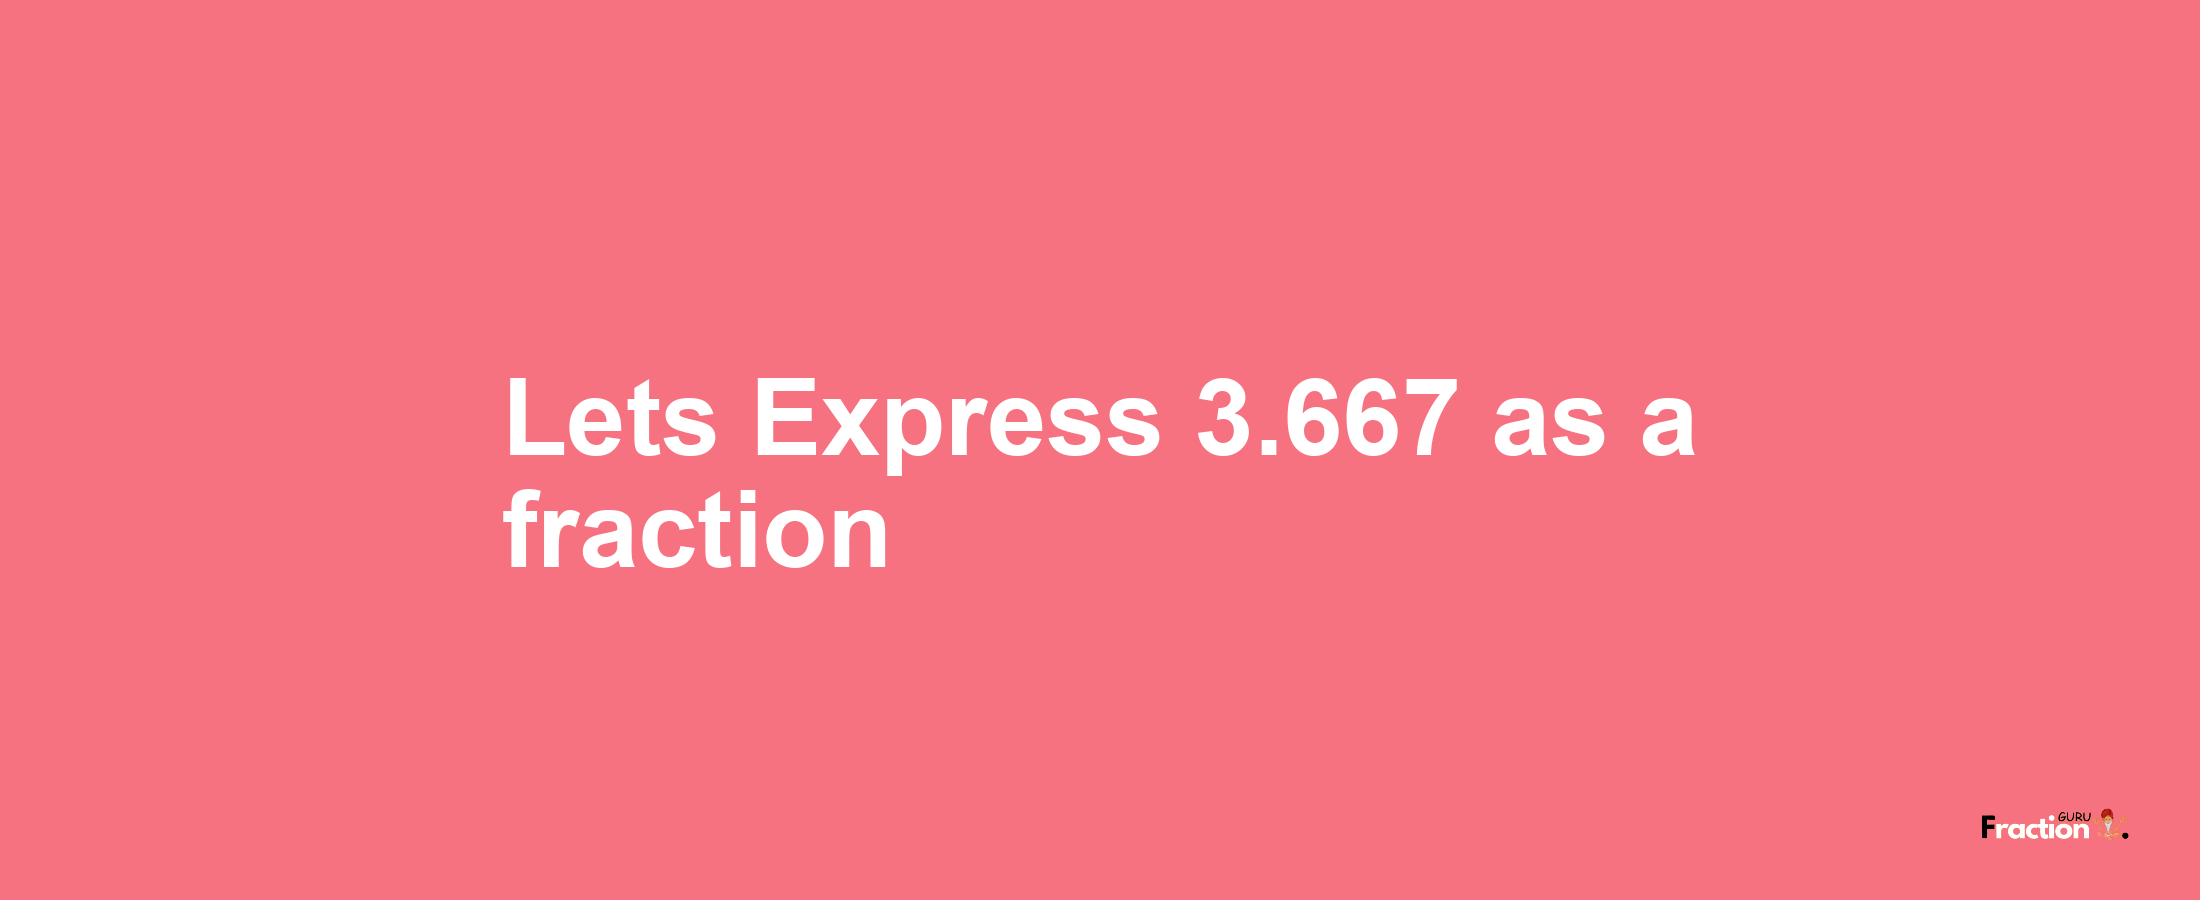 Lets Express 3.667 as afraction